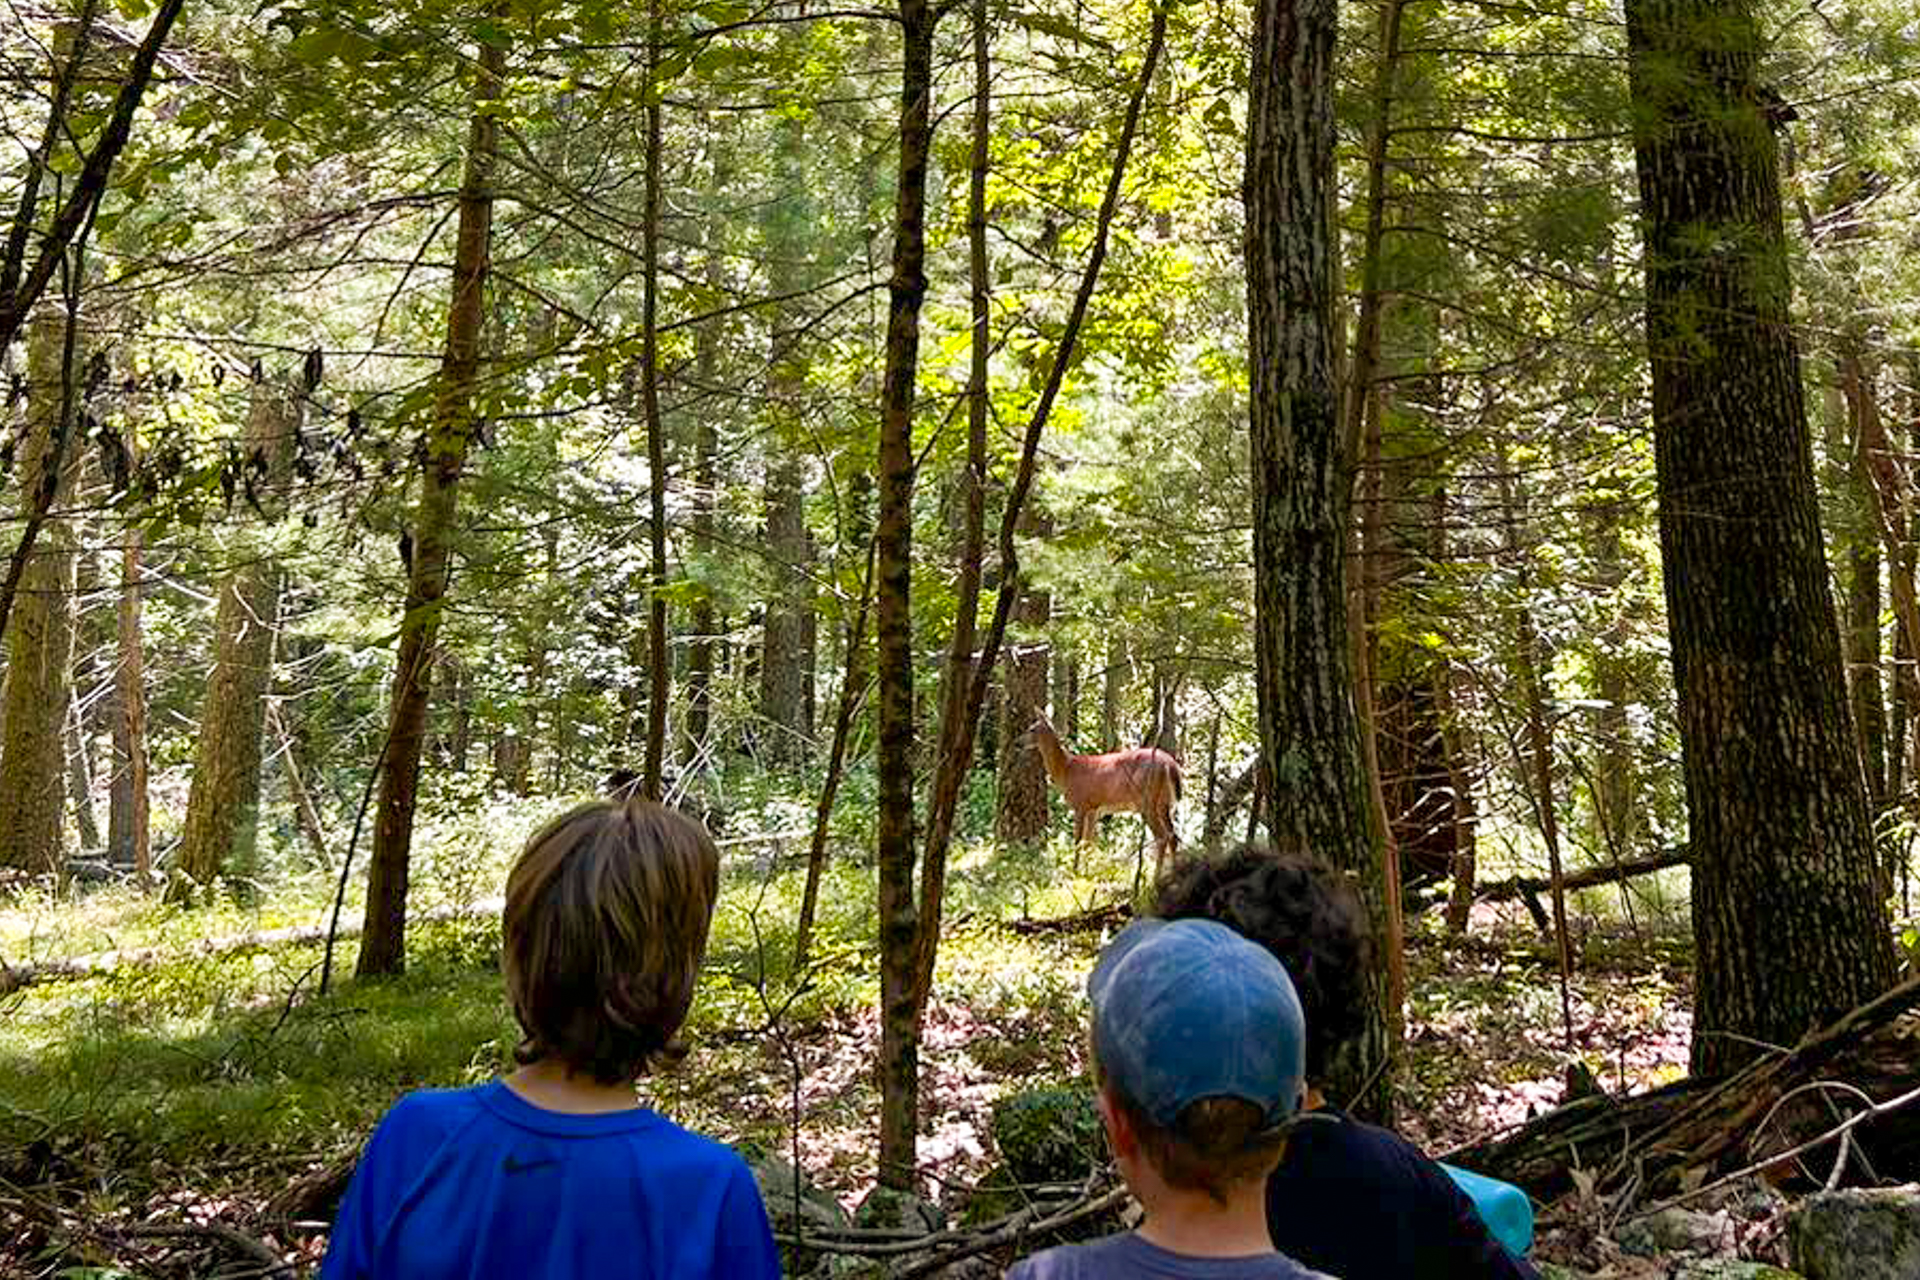 Campers at Moose Hill Nature Camp watch a deer in the forest